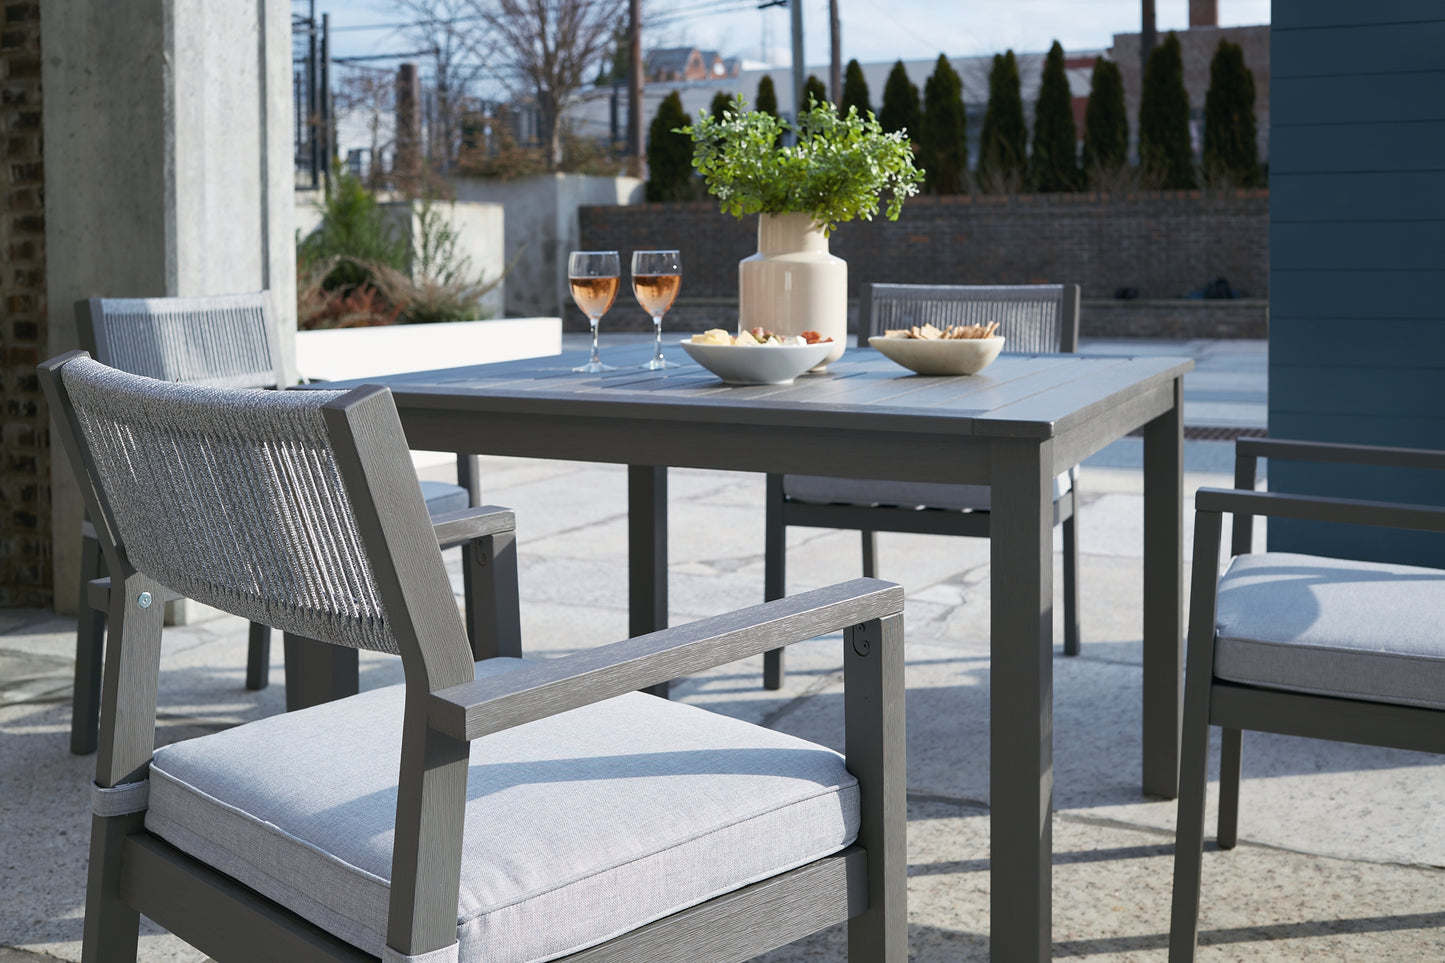 Eden Town Outdoor Dining Table and 4 Chairs